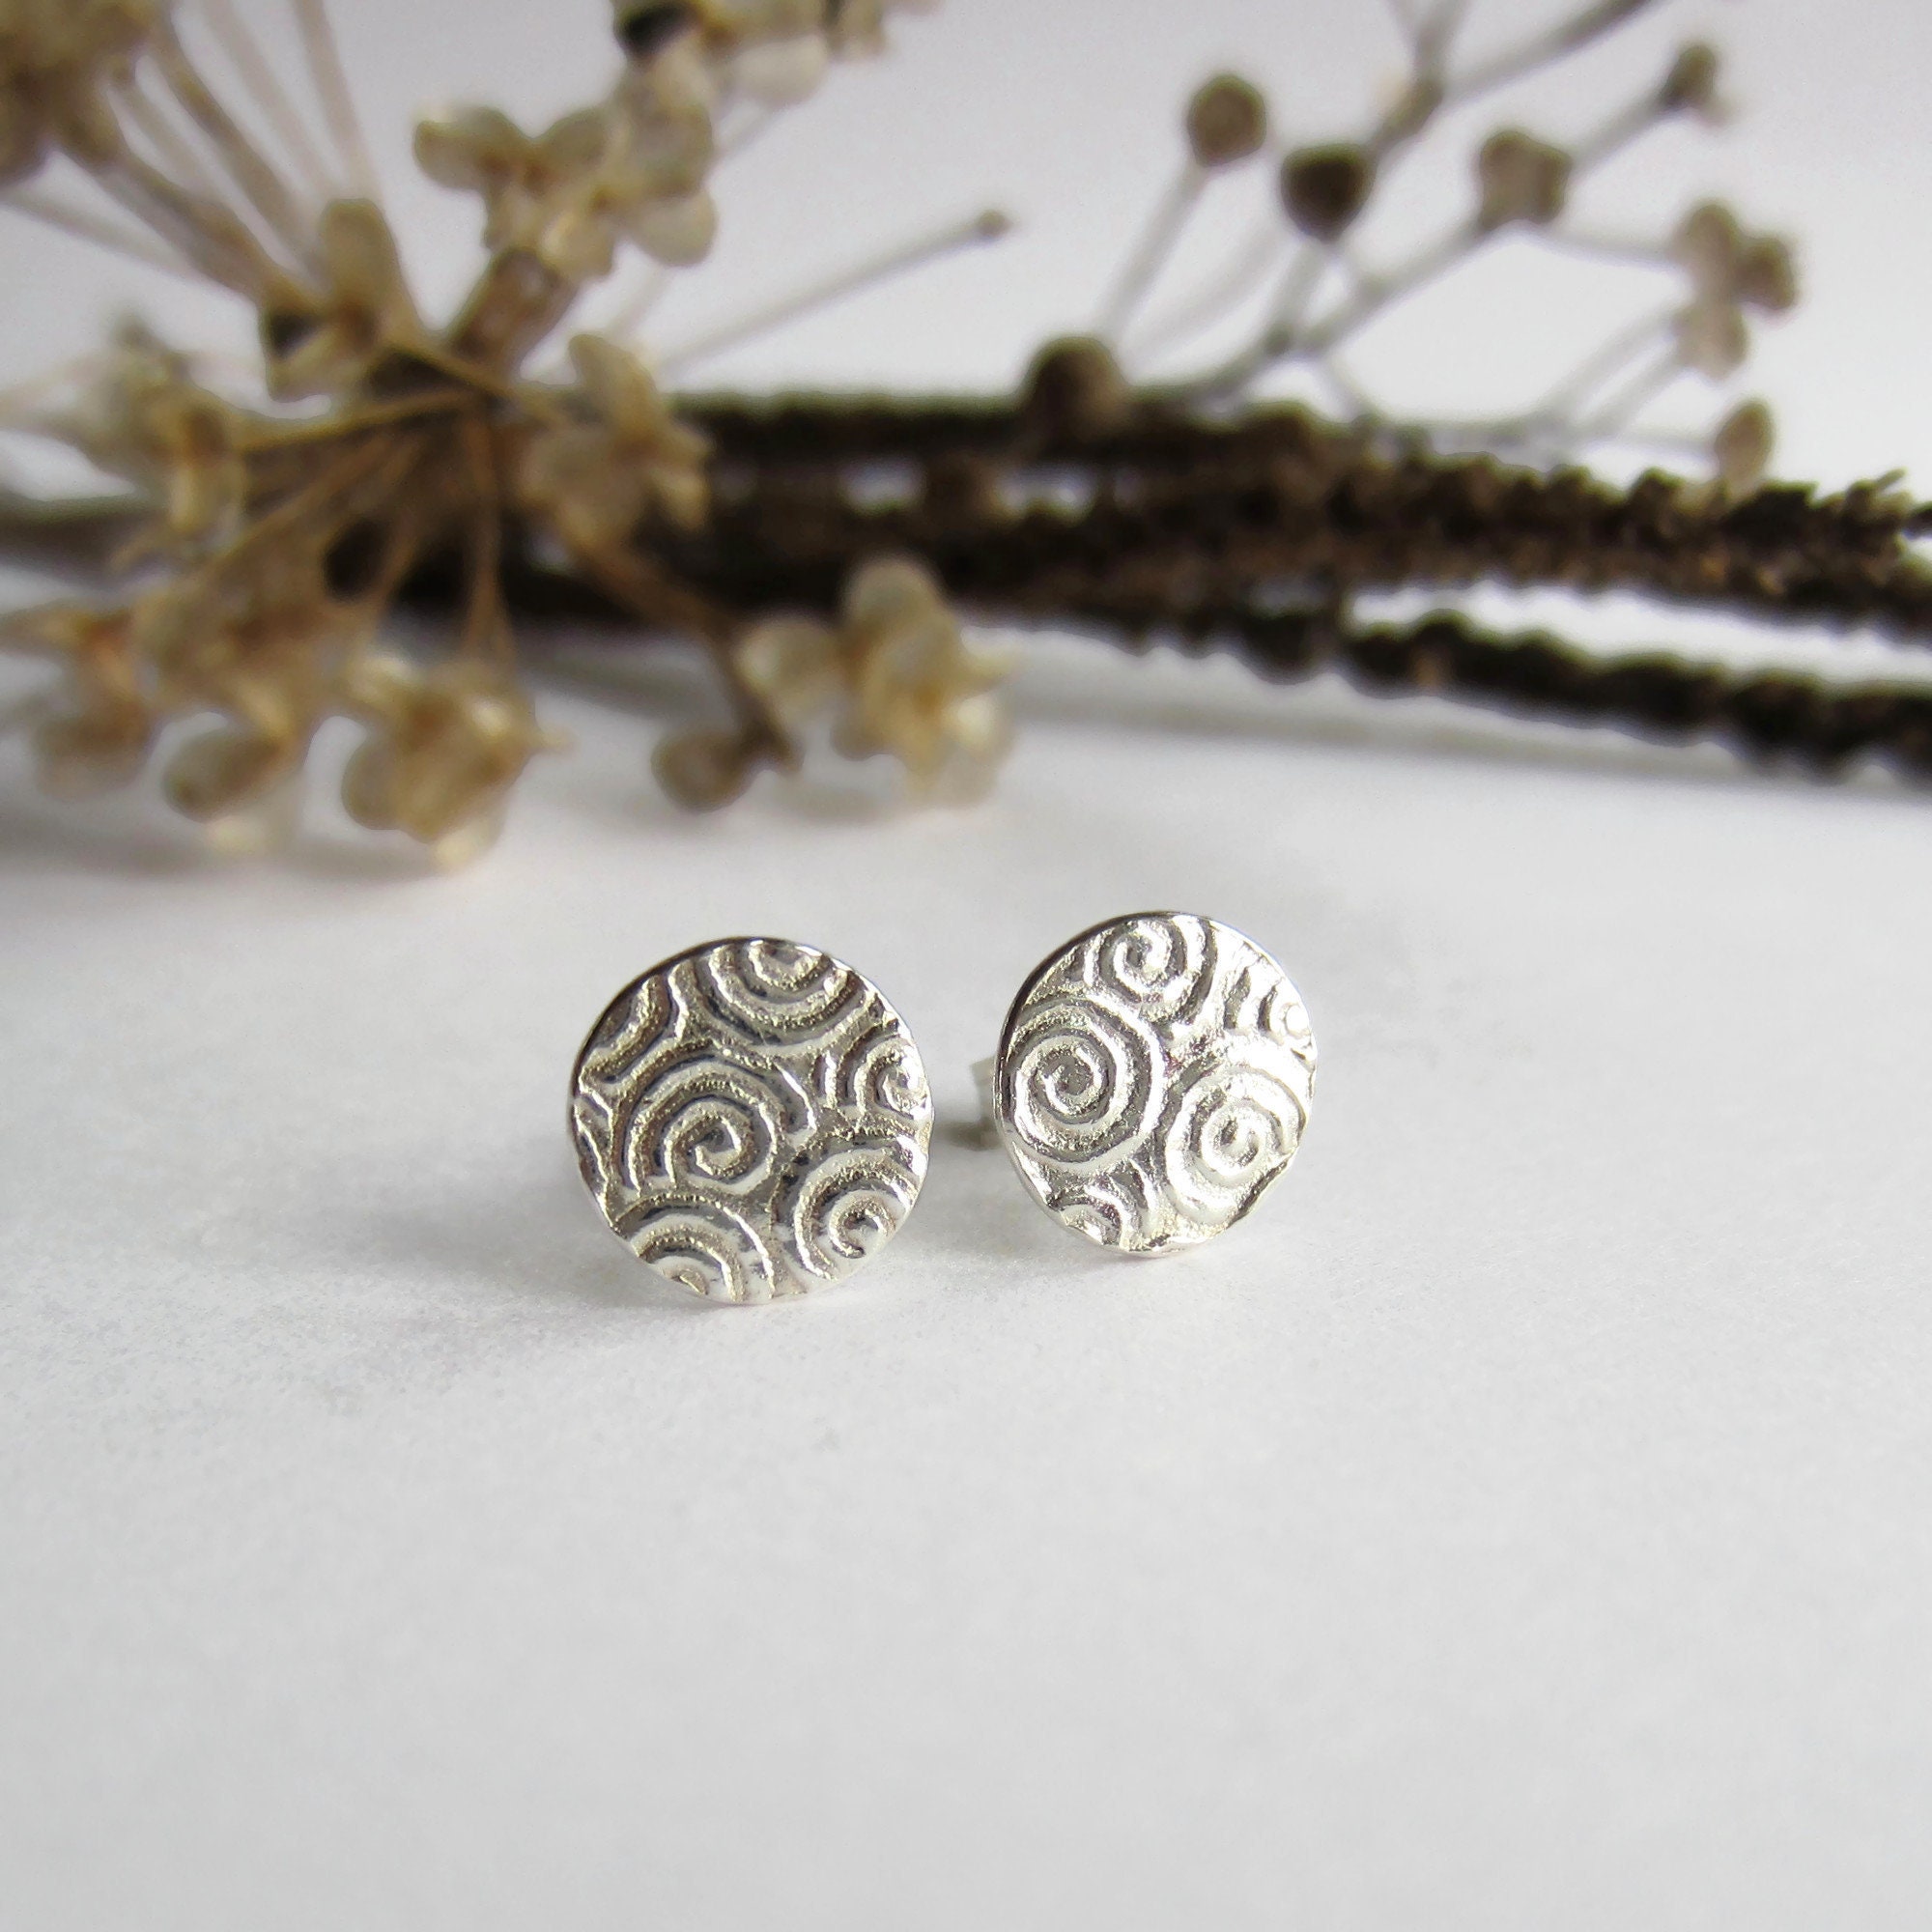 Fine Silver Spiral Pattern Studs Textured Disc Earrings | Etsy